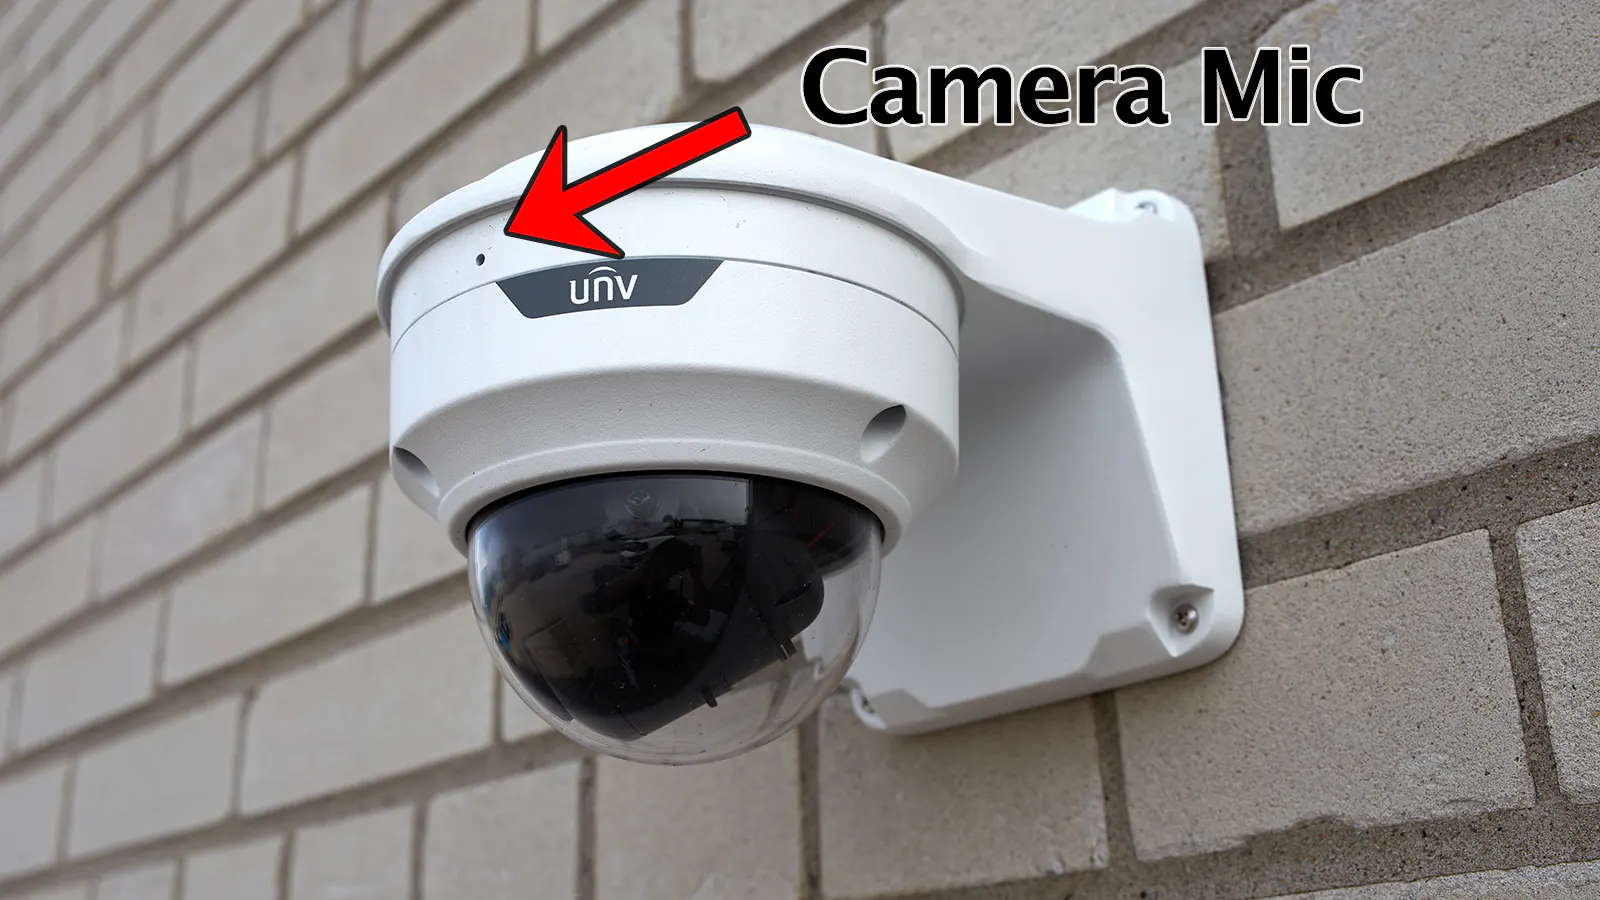 A security camera mounted outdoors on a concrete wall